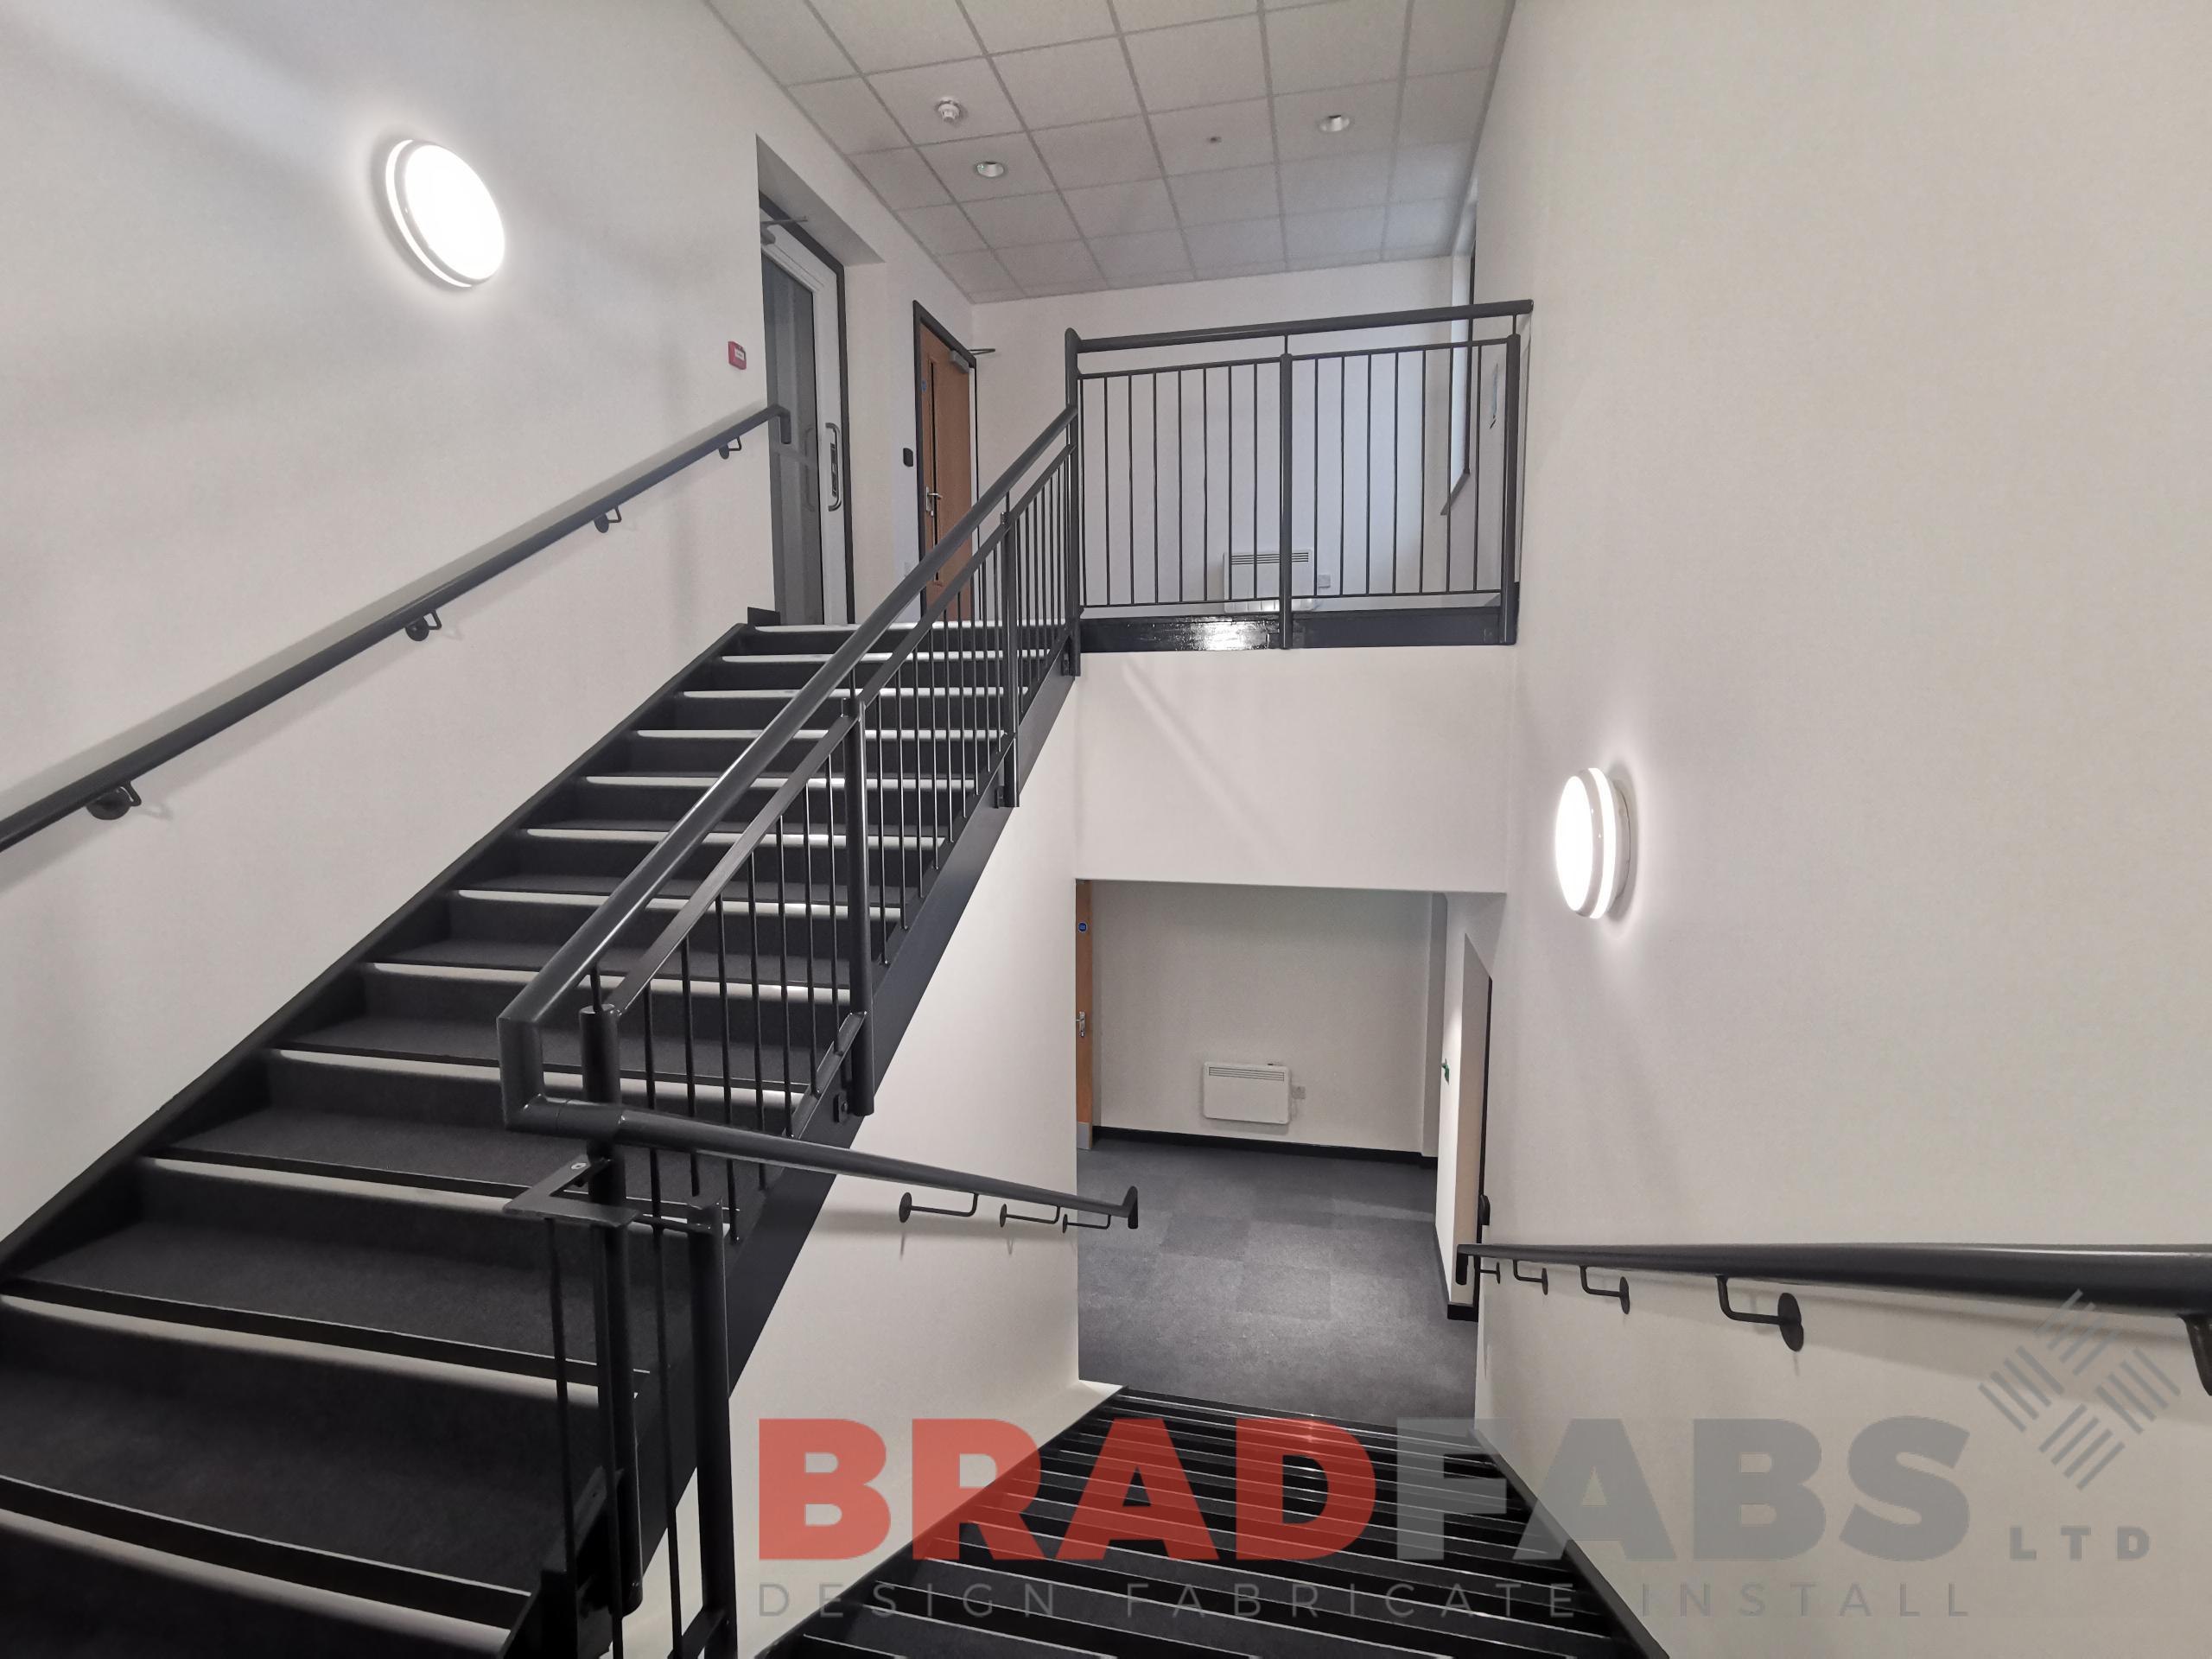 Internal two flight school staircase with balustrade to stair and landing, bespoke designed, supplied and installed by Bradfabs Ltd 